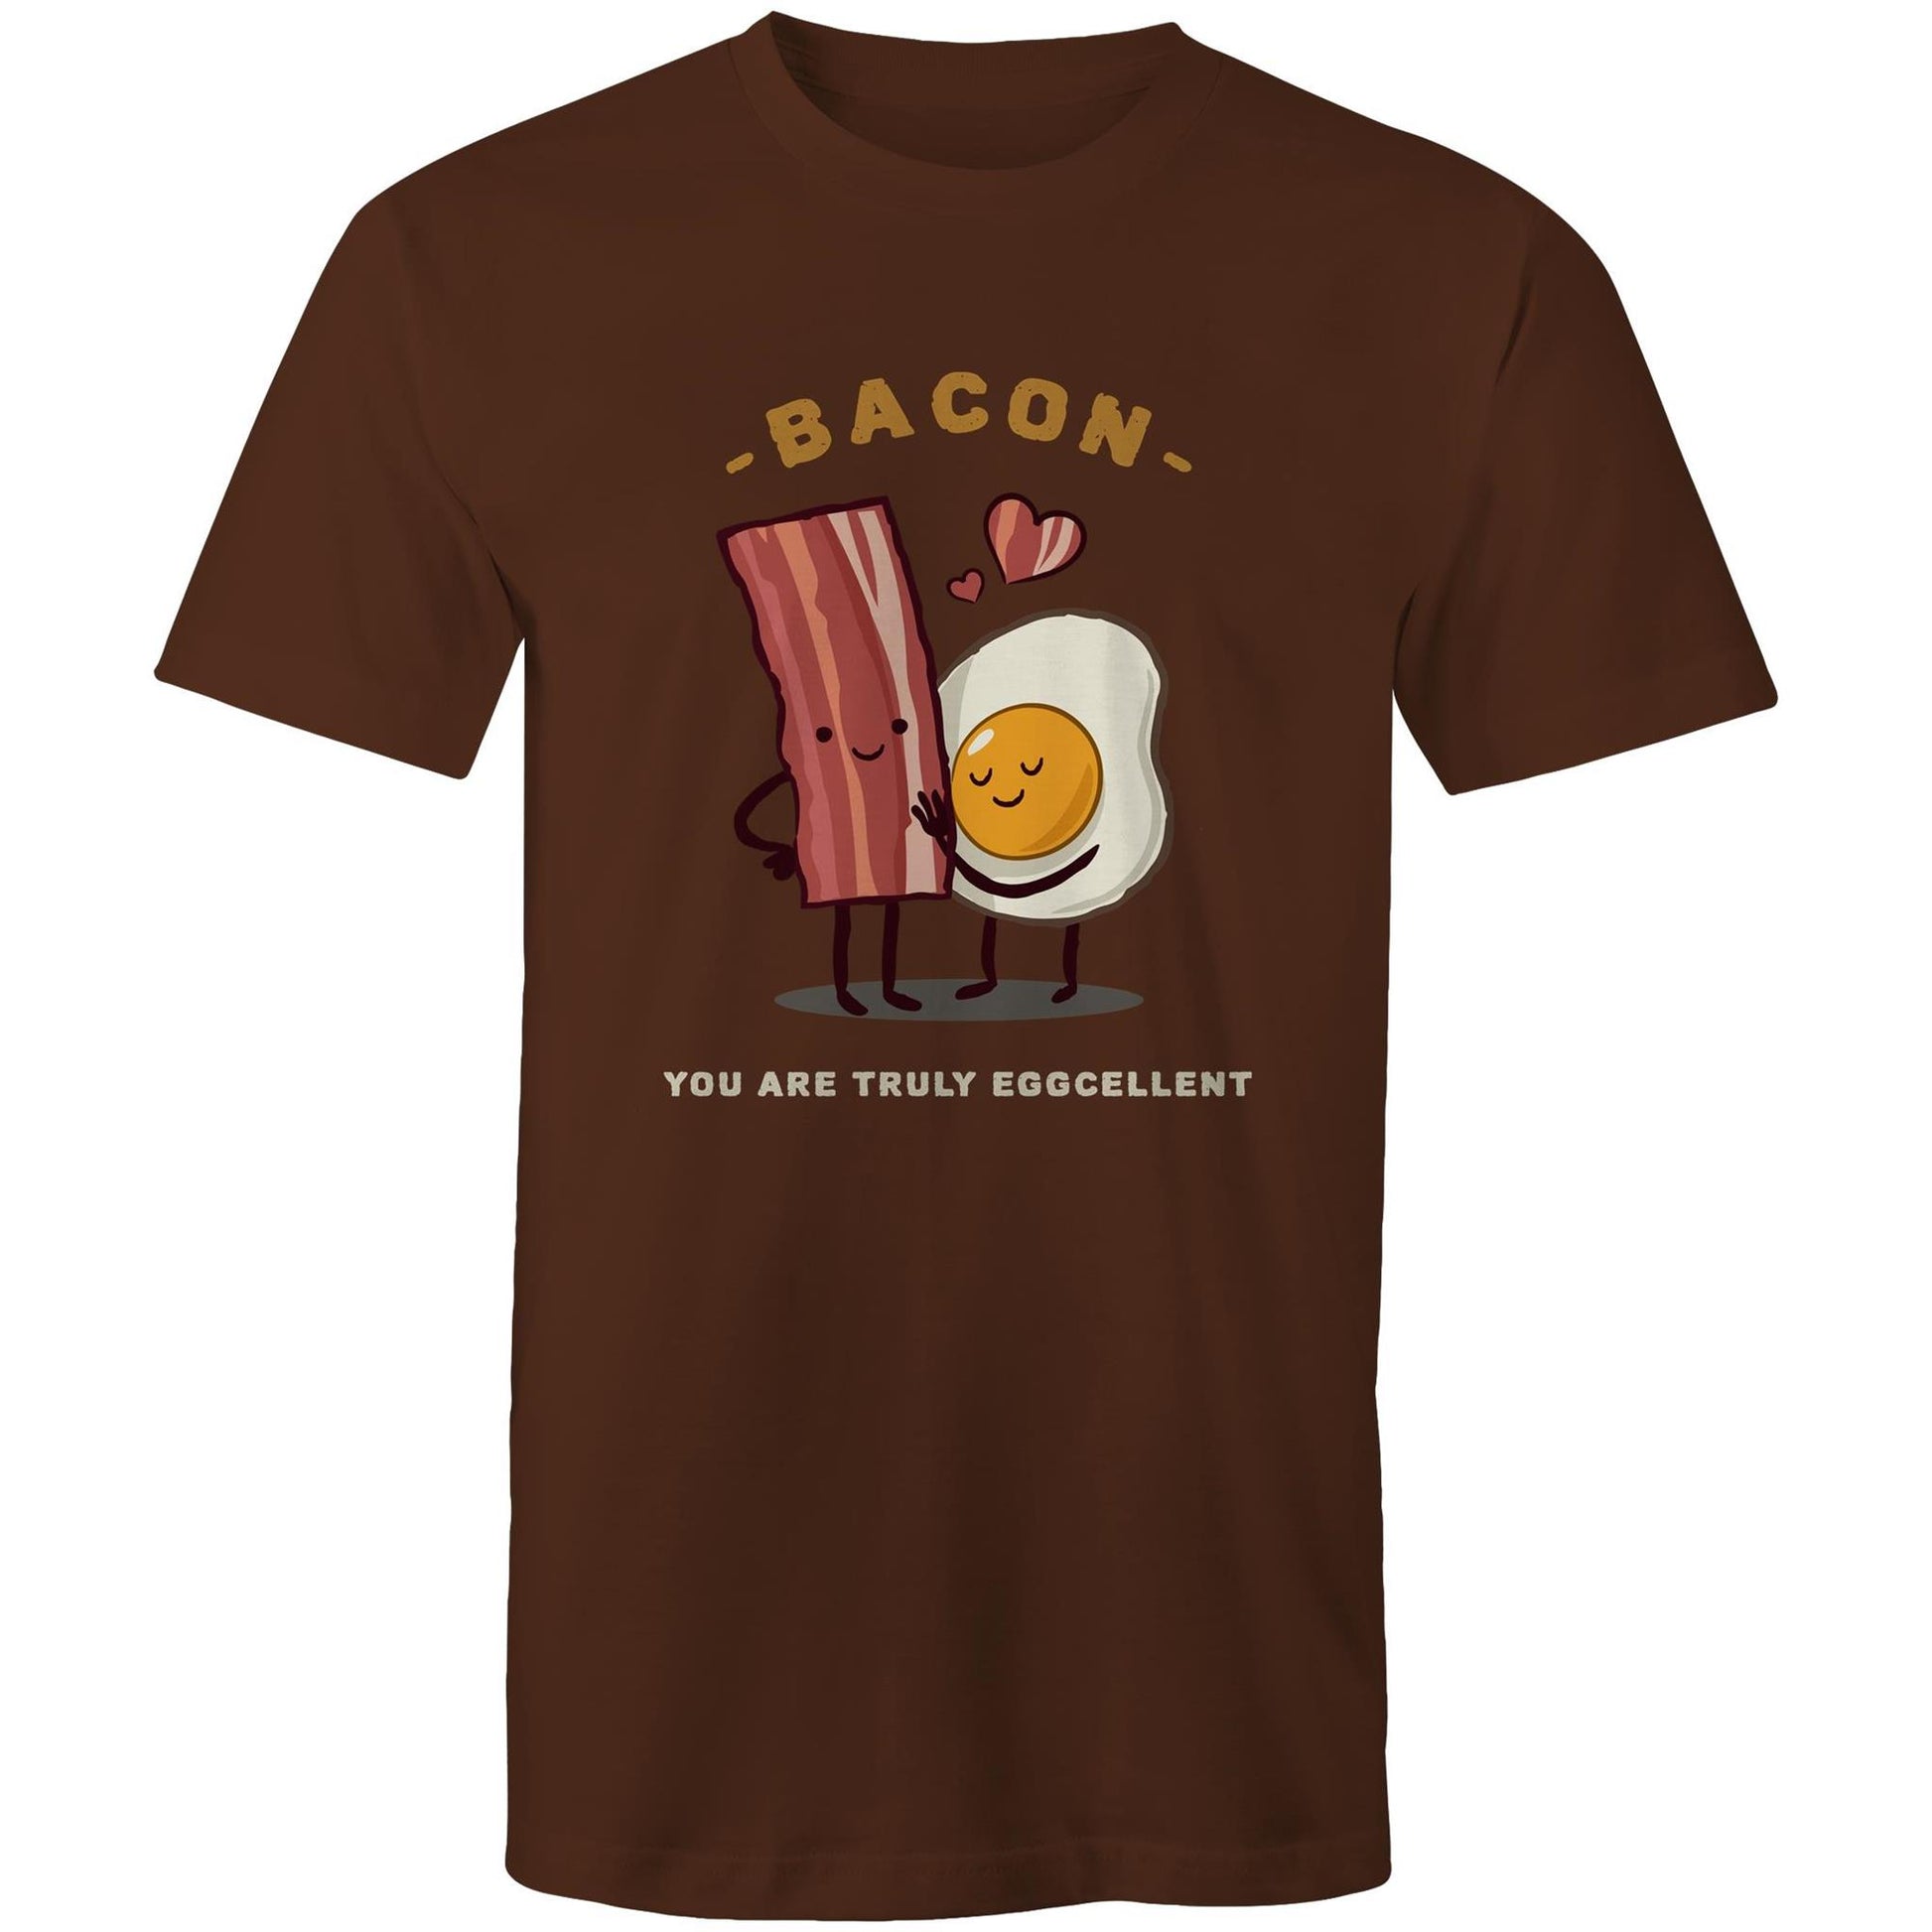 Bacon, You Are Truly Eggcellent - Mens T-Shirt Dark Chocolate Mens T-shirt Food